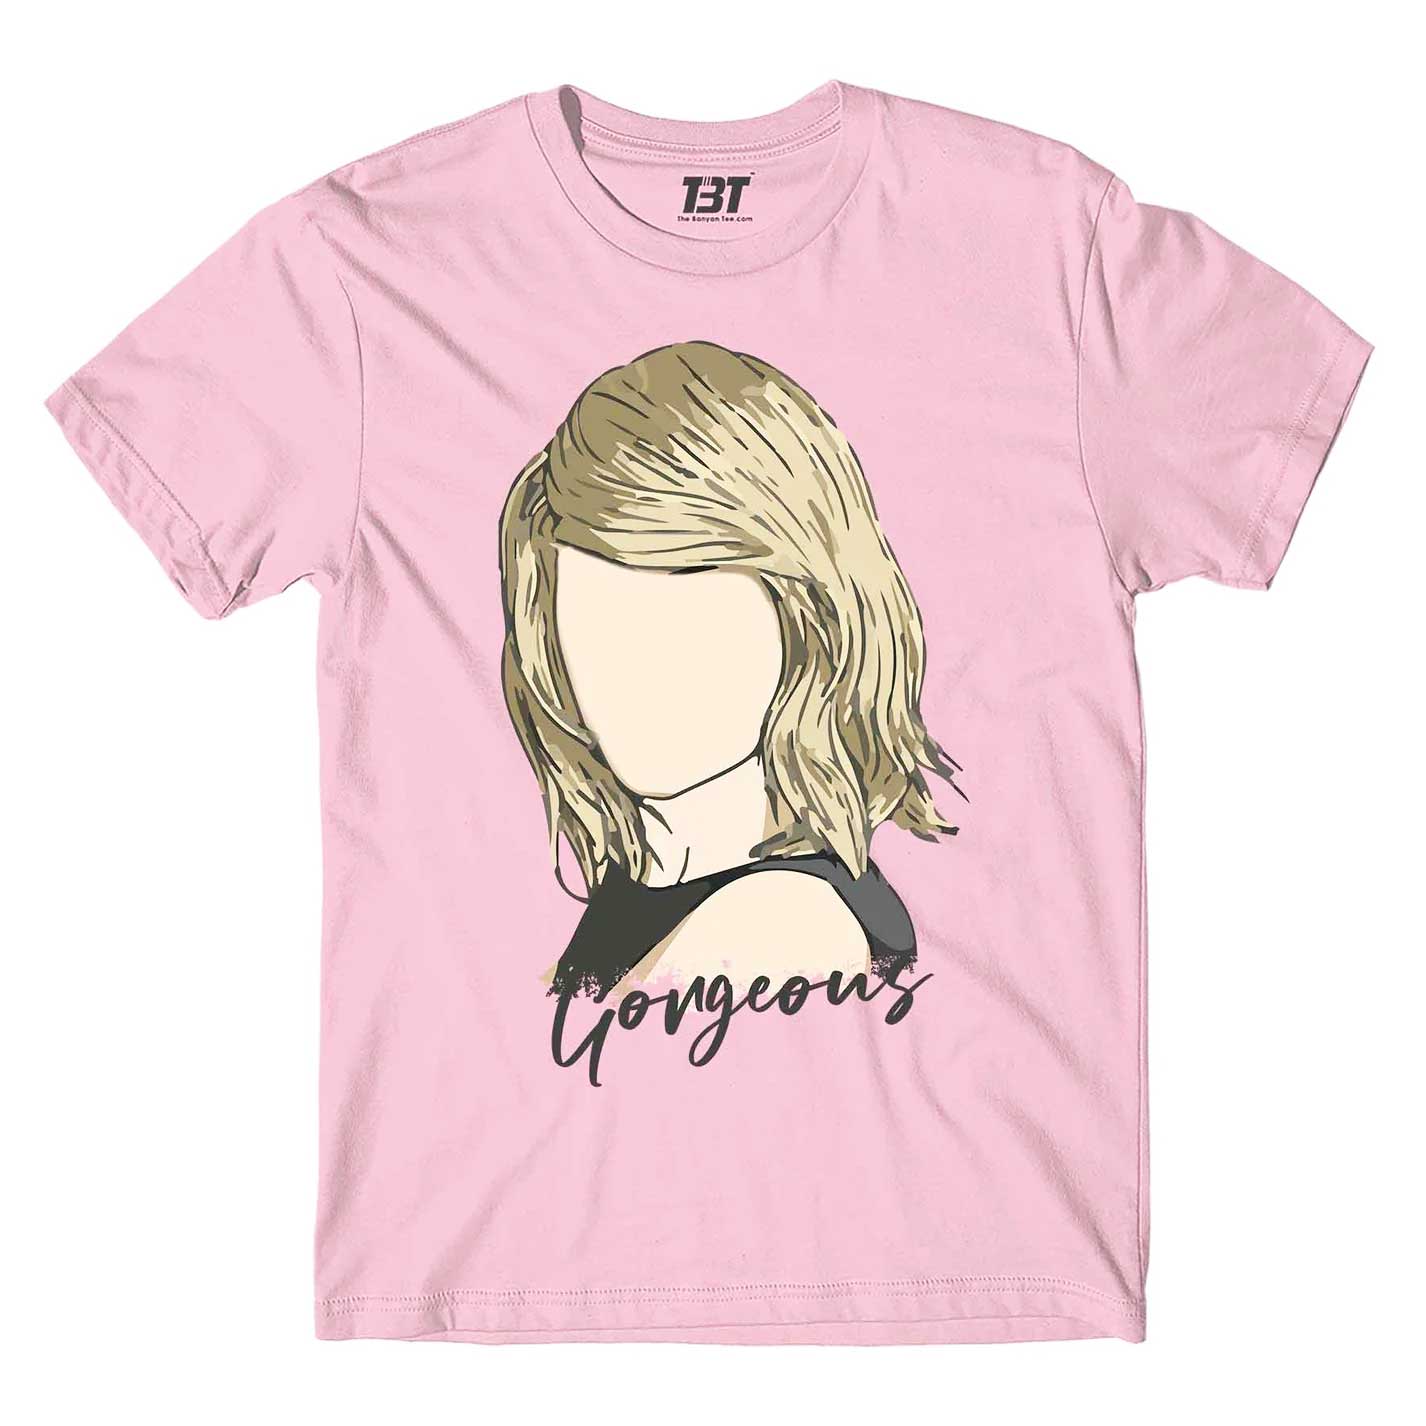  Taylor Swift T-shirts For Kids Girls